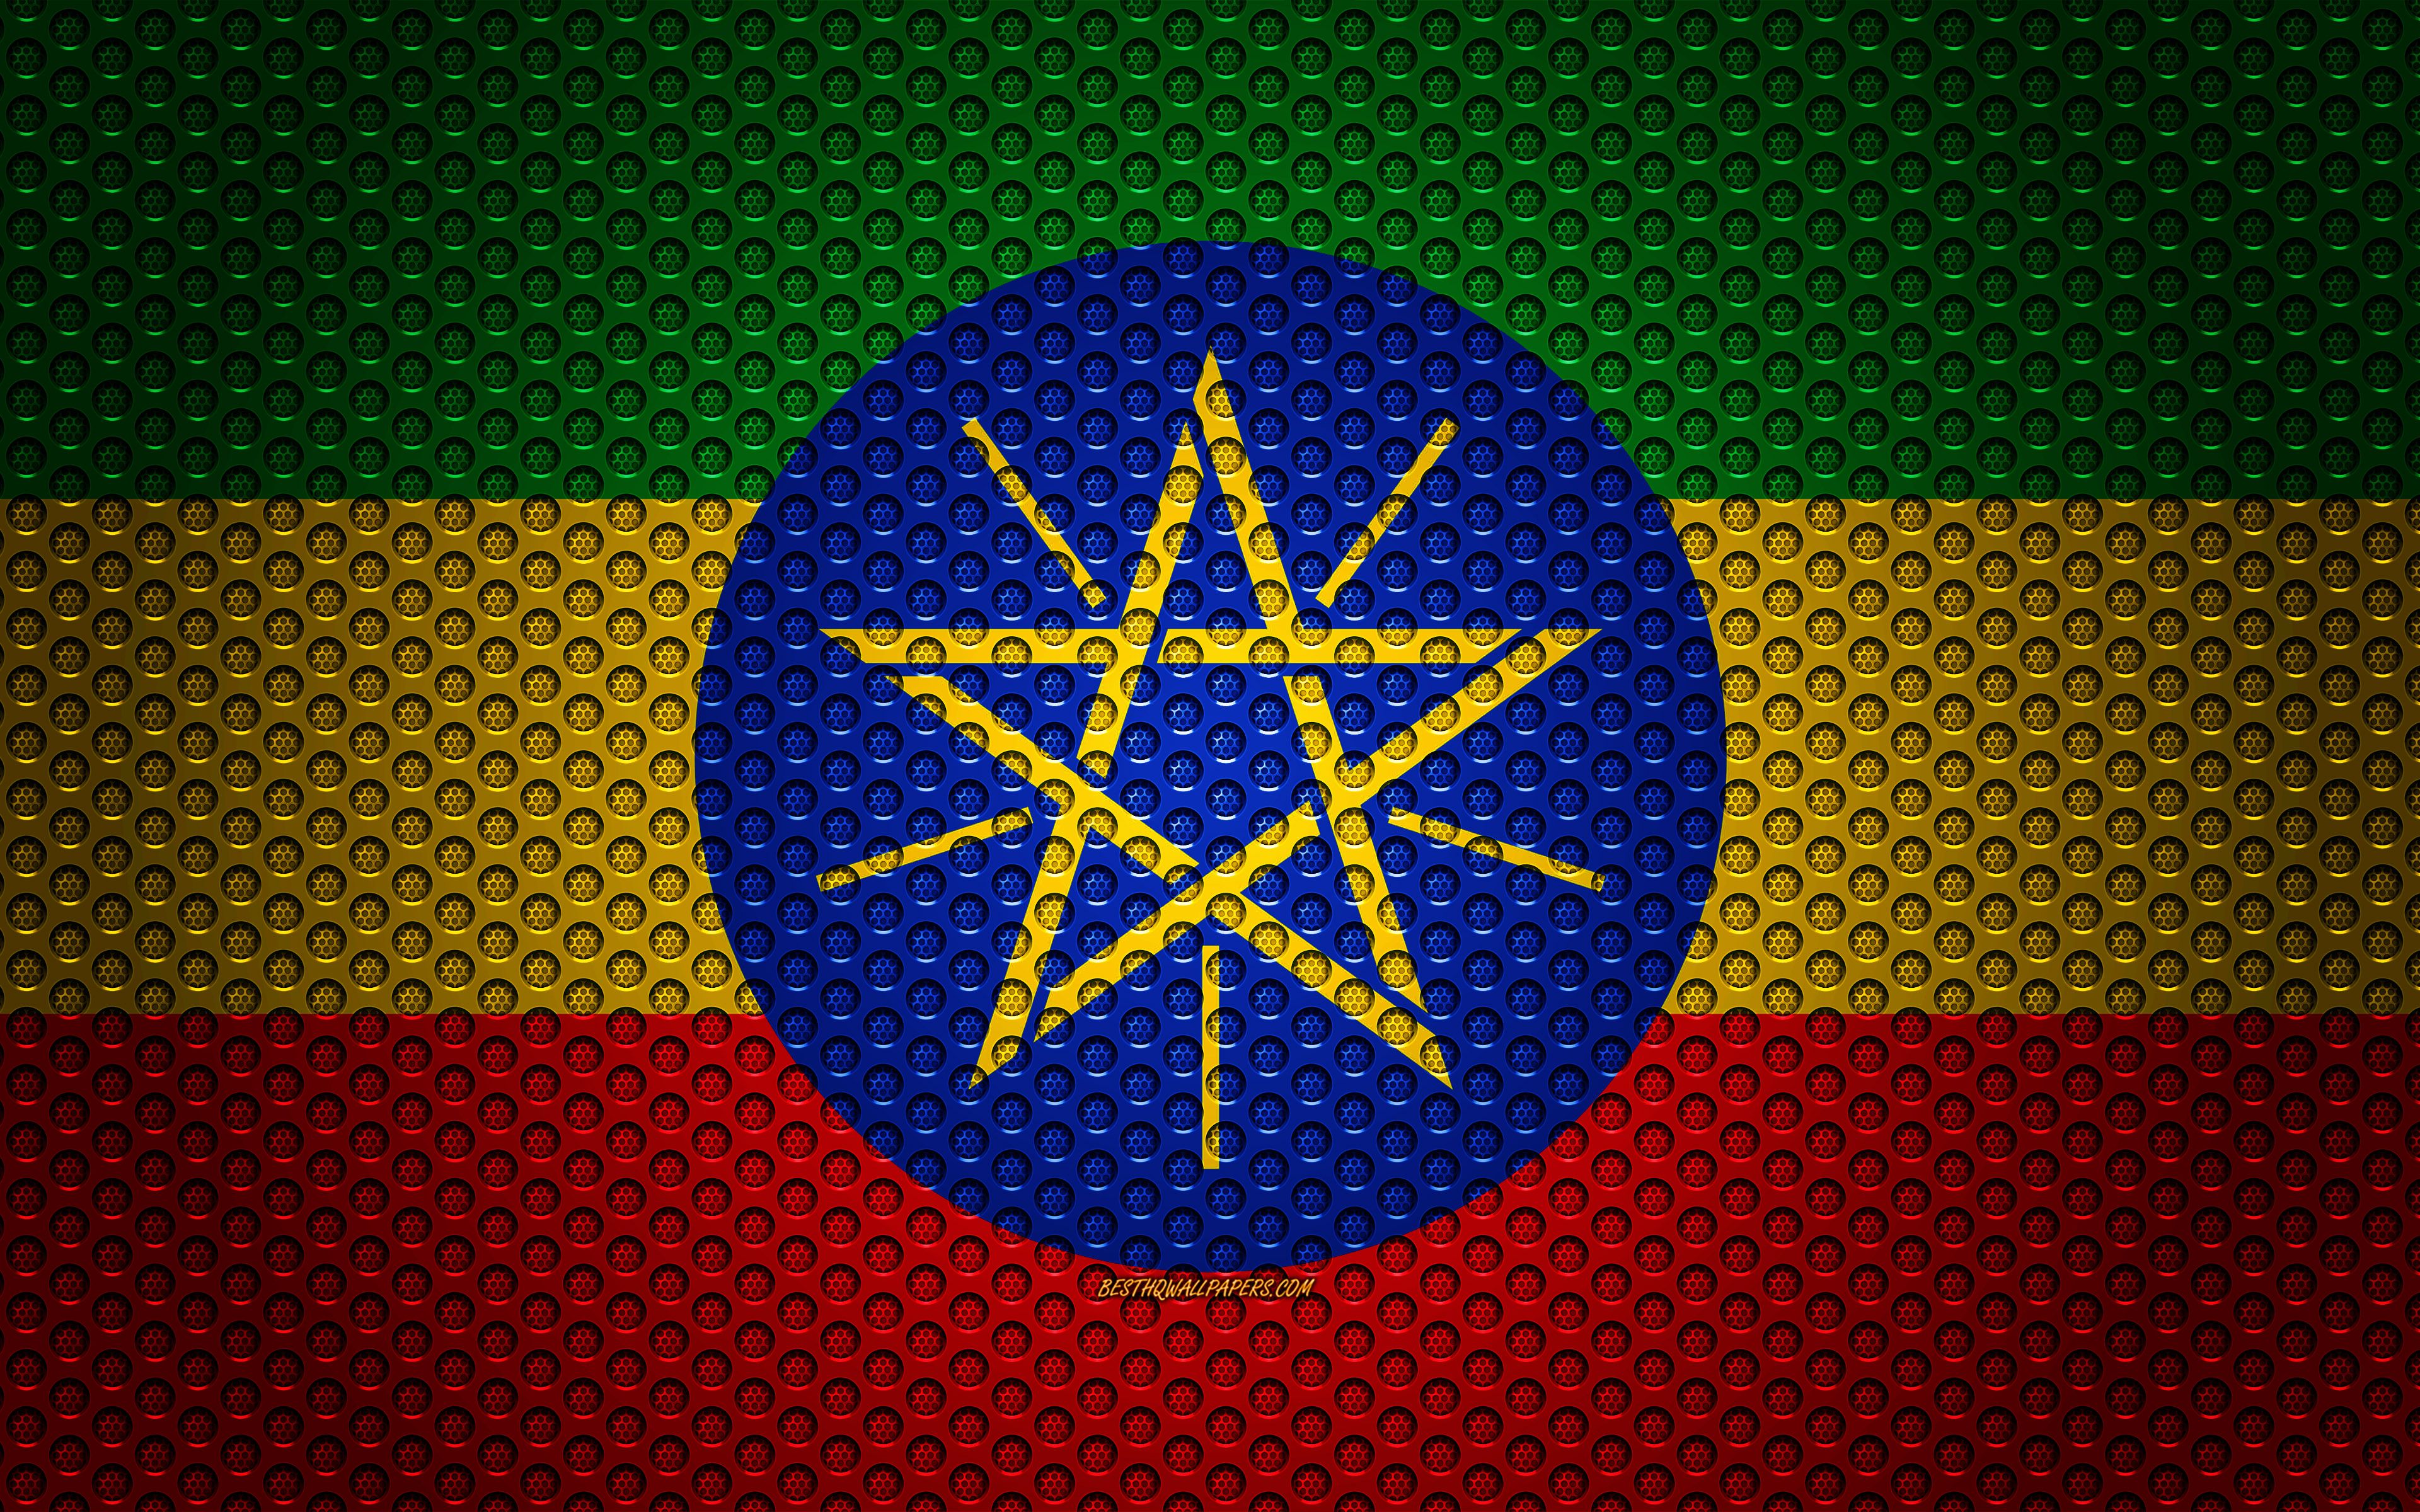 Download wallpaper Flag of Ethiopia, 4k, creative art, metal mesh texture, Ethiopian flag, national symbol, Ethiopia, Africa, flags of African countries for desktop with resolution 3840x2400. High Quality HD picture wallpaper